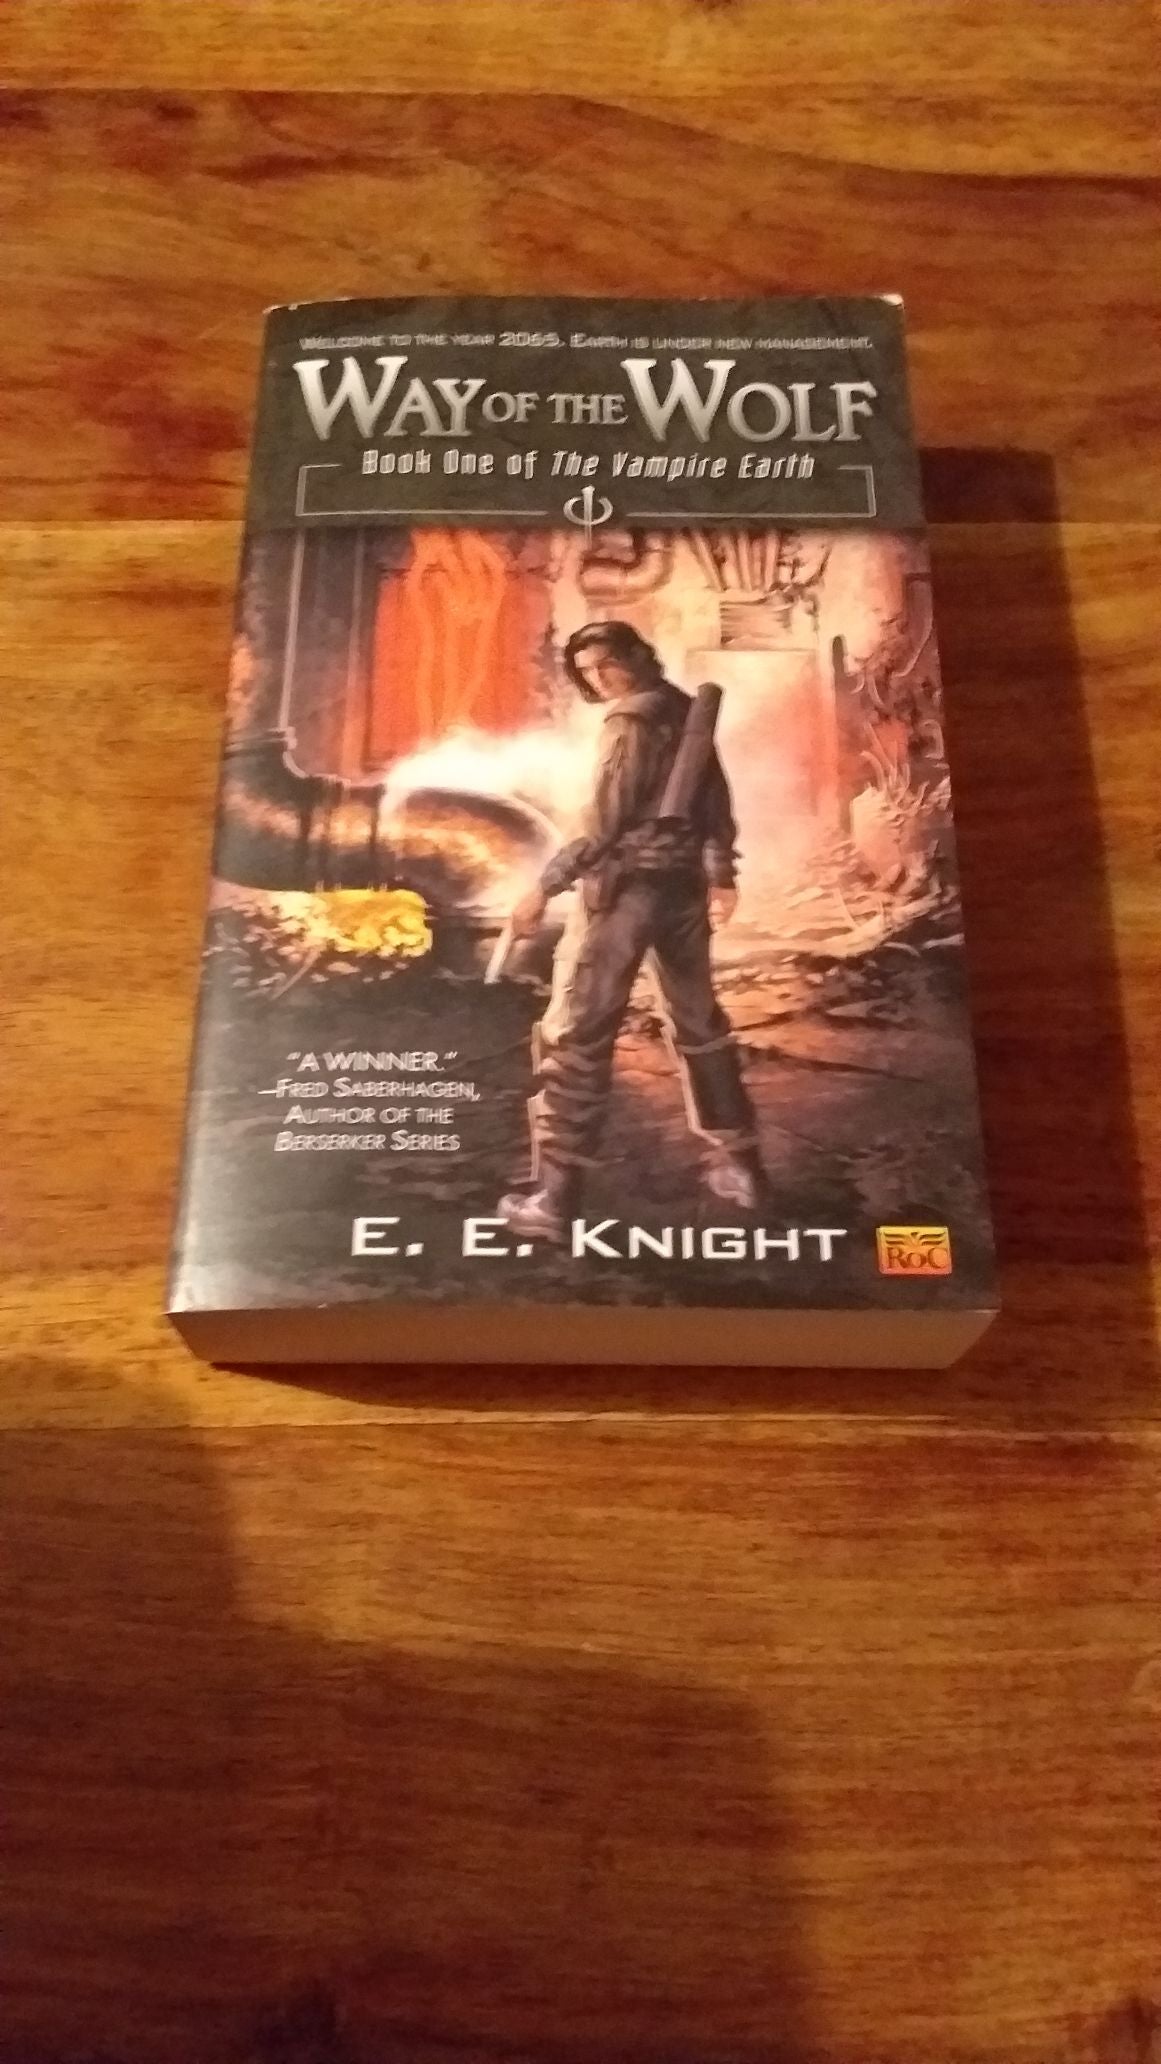 Way of the Wolf : Book One of the Vampire Earth by E. E. Knight